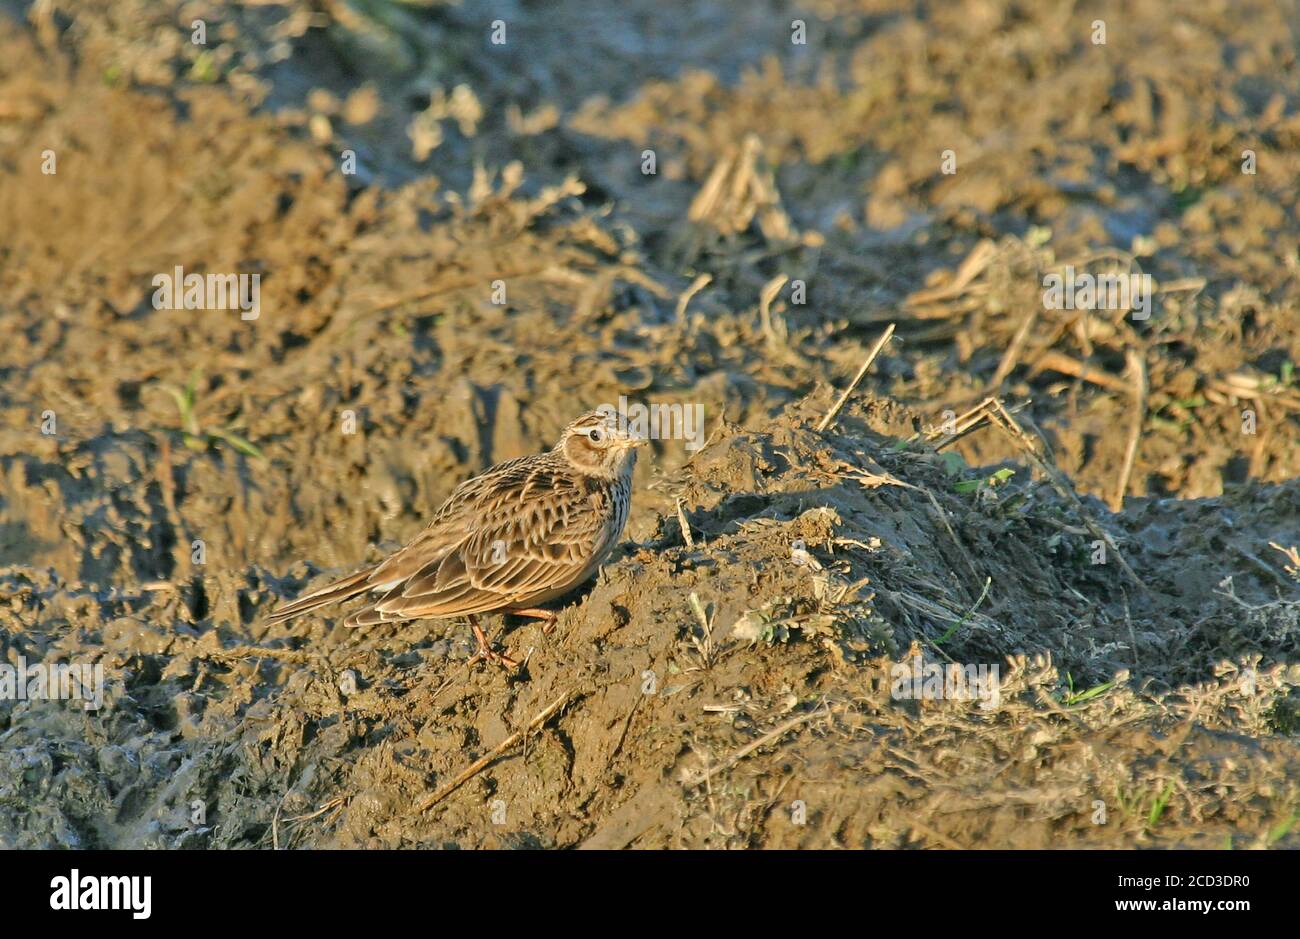 Japanese skylark (Alauda japonica, Alauda japonica japonica), standing on the ground in a rural agricultural field, Japan Stock Photo